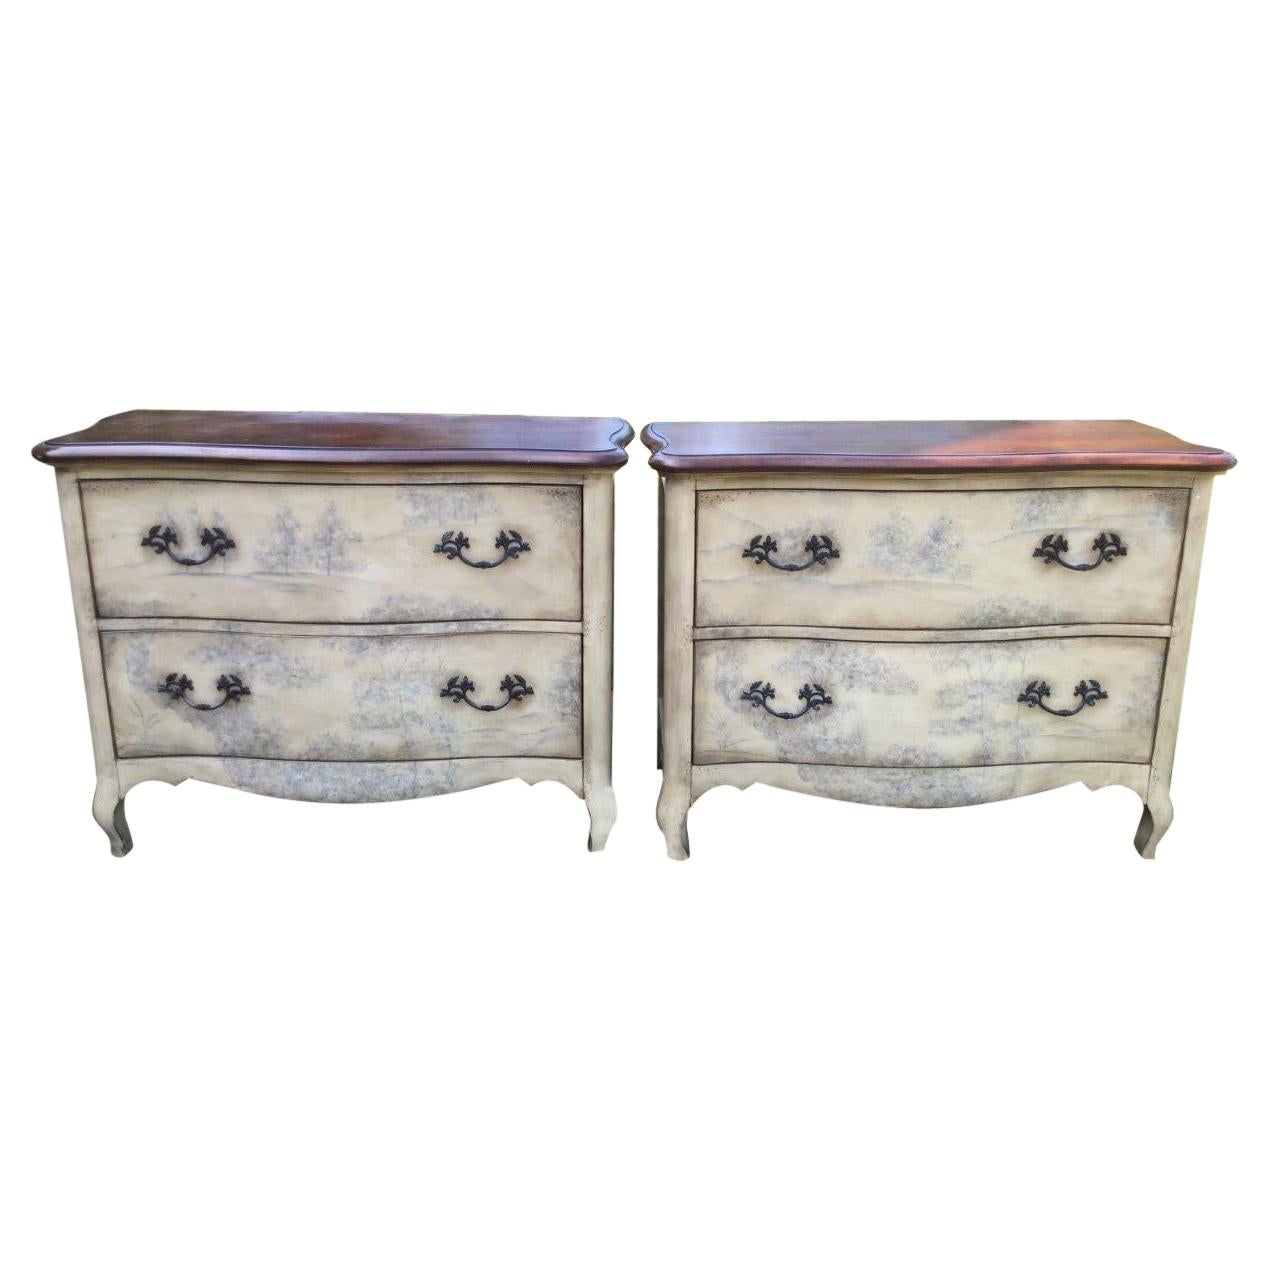 Romantic Pair of French Style Gray & White Painted Chests of Drawers